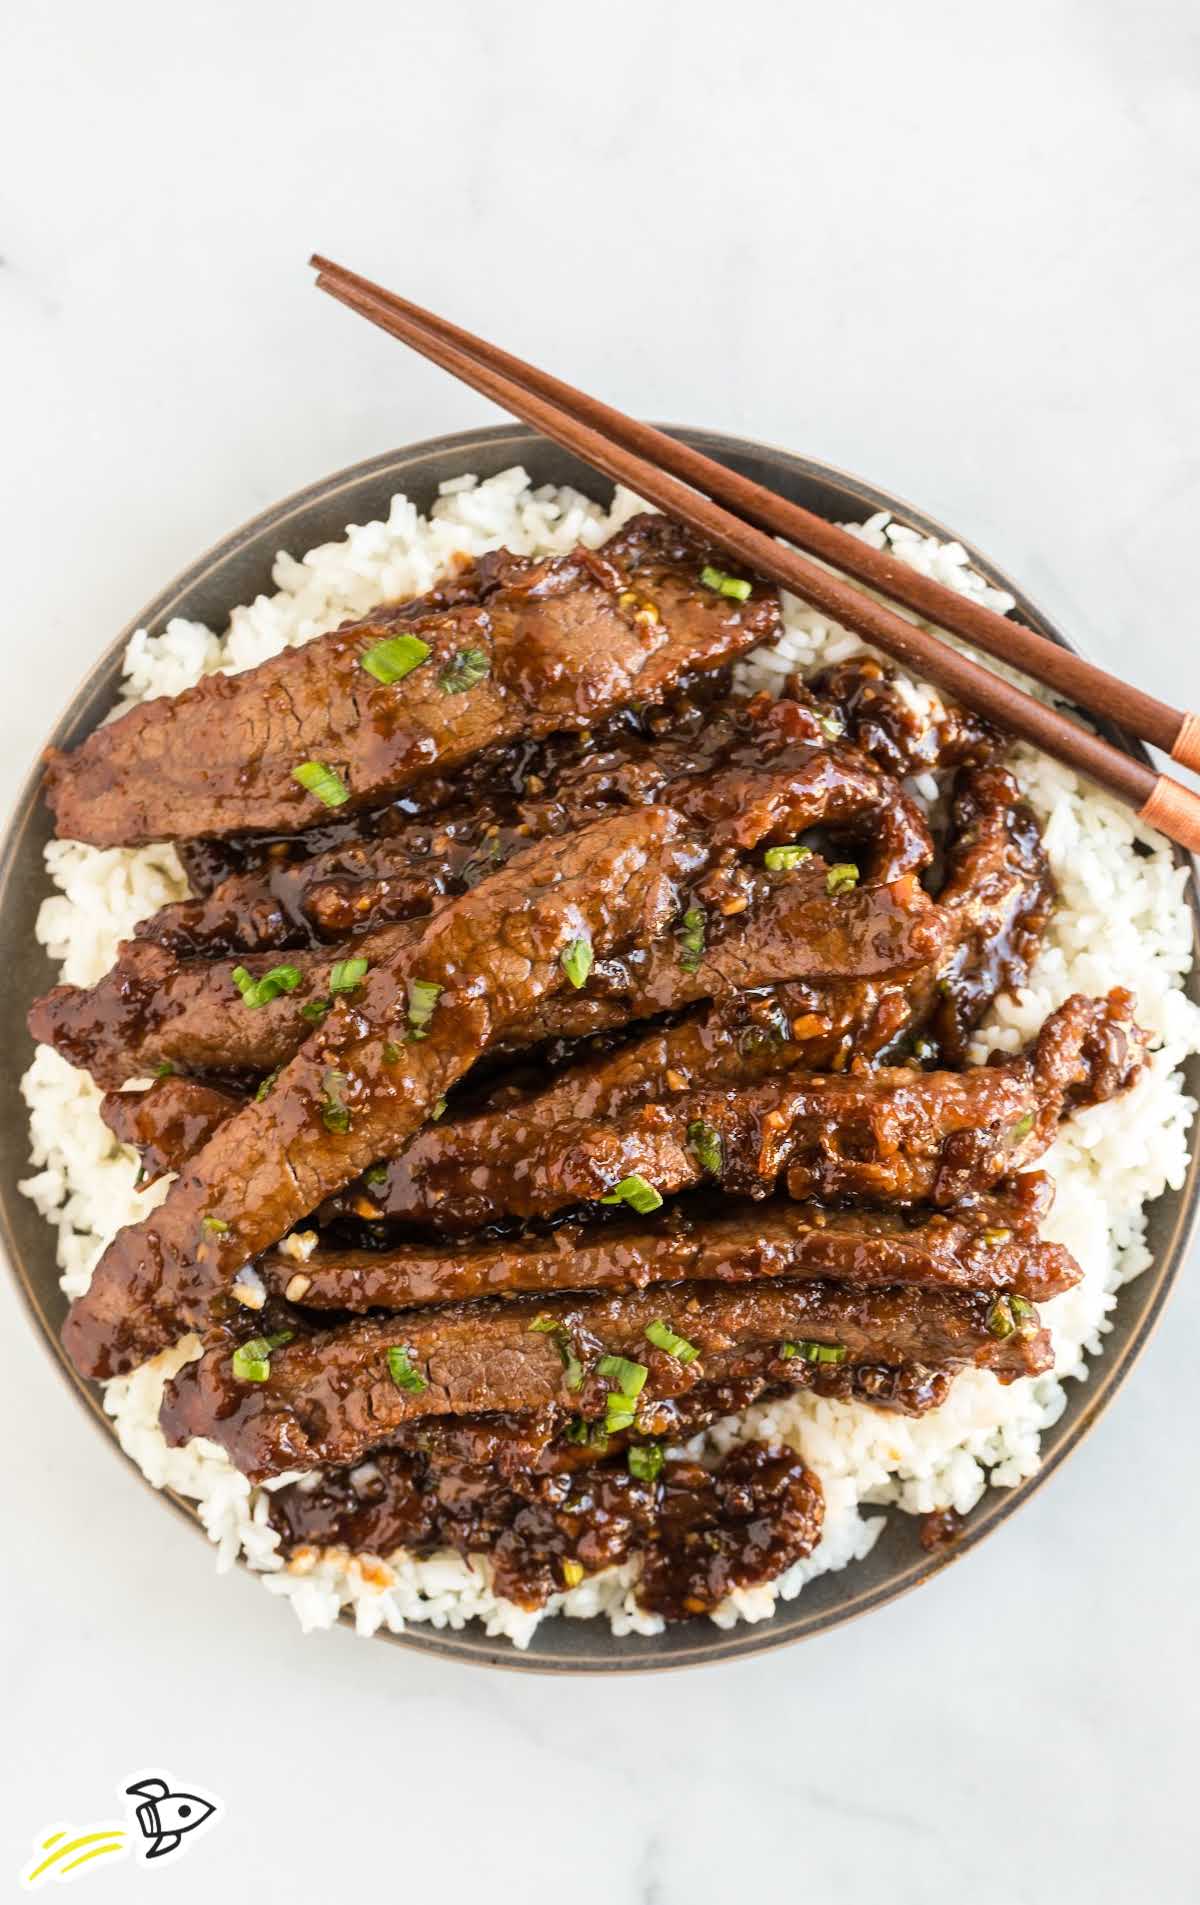 close up shot of a plate of Mongolian Beef garnished with green onions and served over white rice